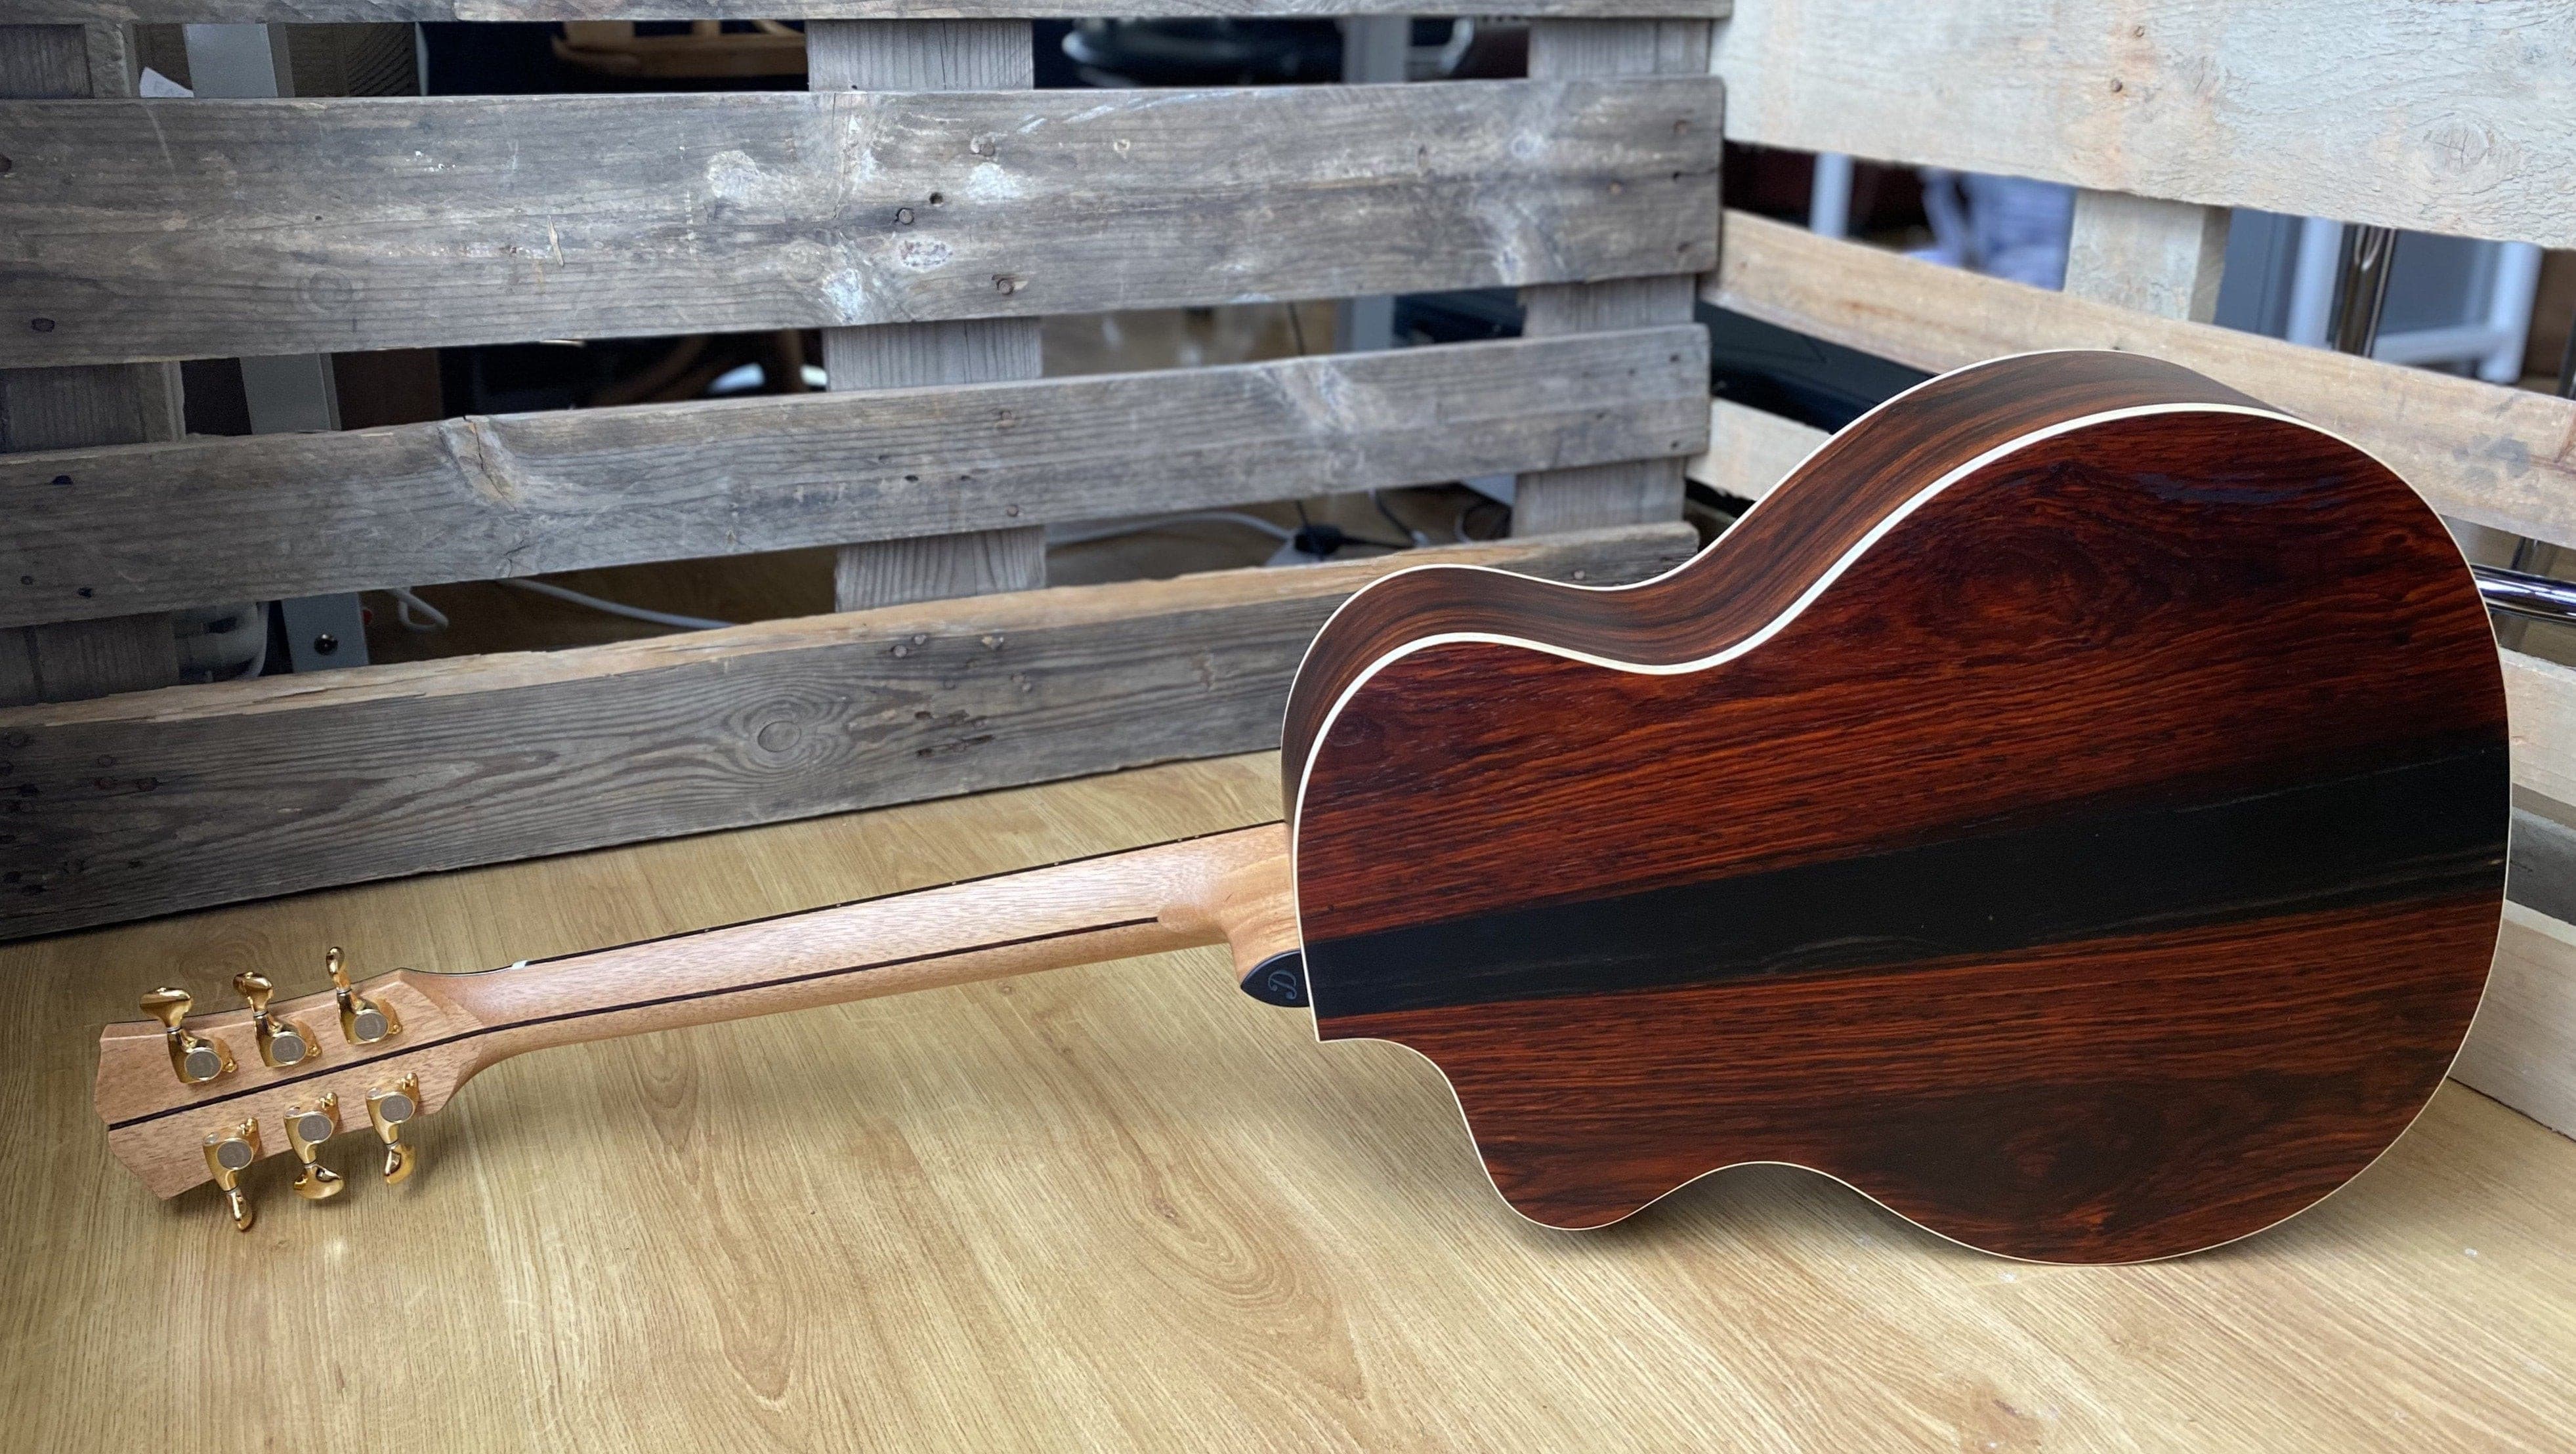 Dowina Cocobolo Trio Plate (Cocobolo III) GACE With LR Baggs Anthem, Acoustic Guitar for sale at Richards Guitars.